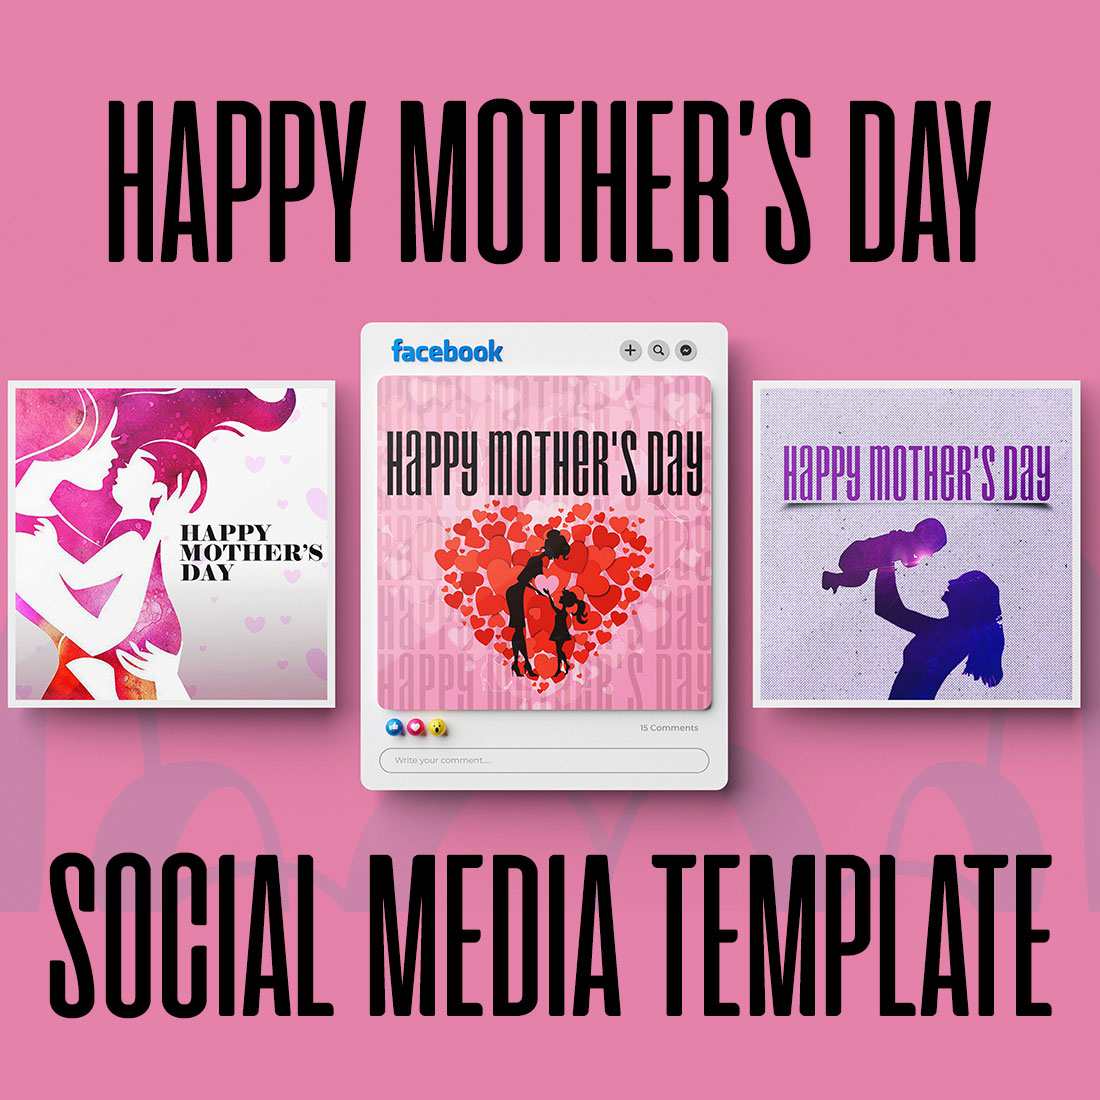 3 social media post template of Happy Mothers' Day cover image.